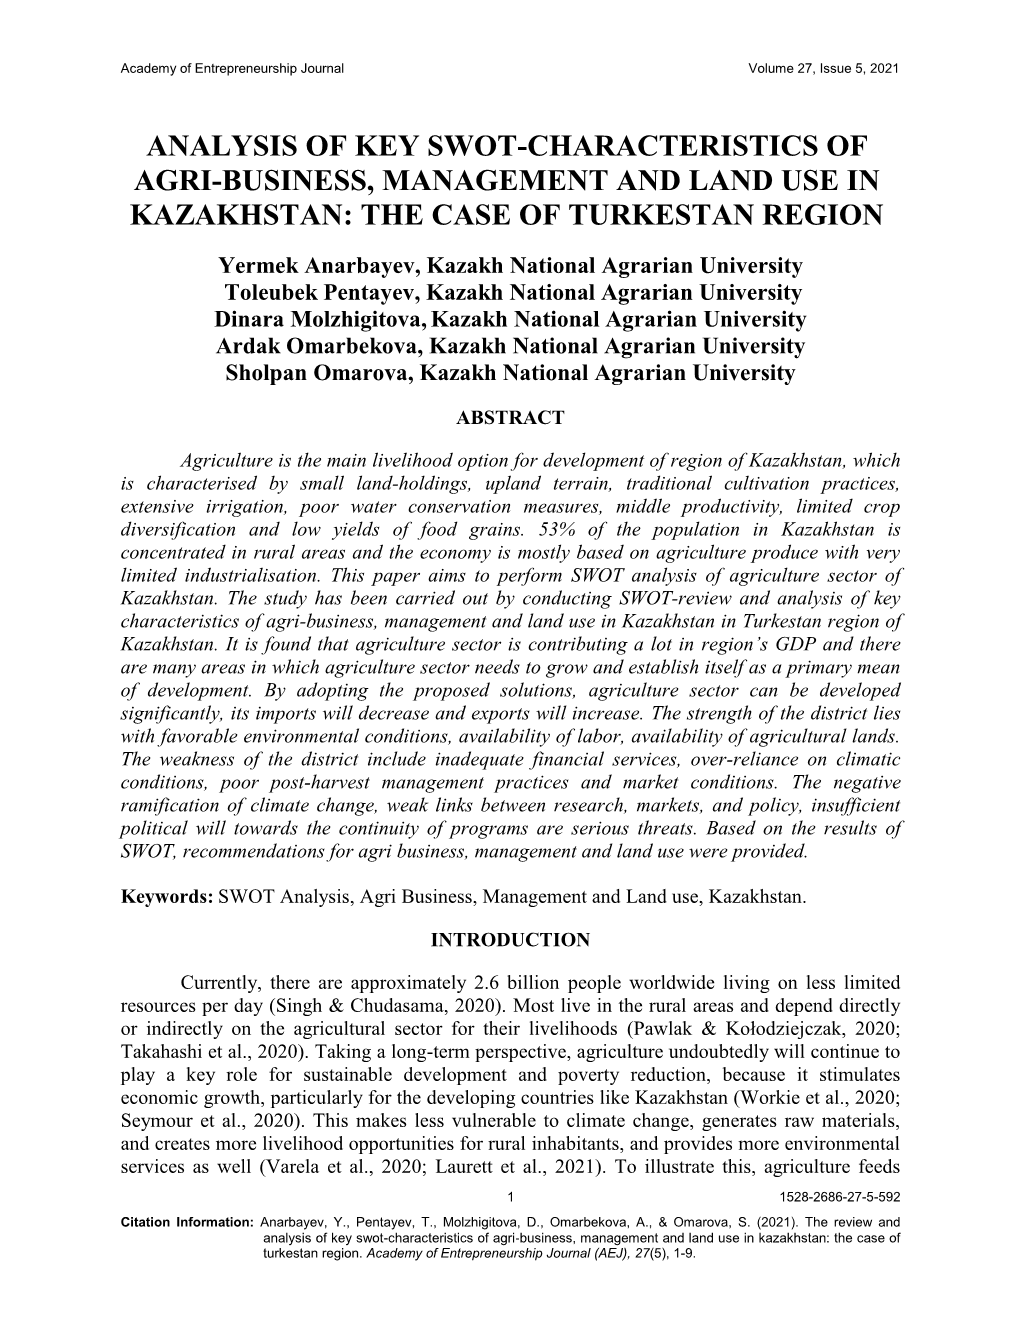 Analysis of Key Swot-Characteristics of Agri‐Business, Management and Land Use in Kazakhstan: the Case of Turkestan Region